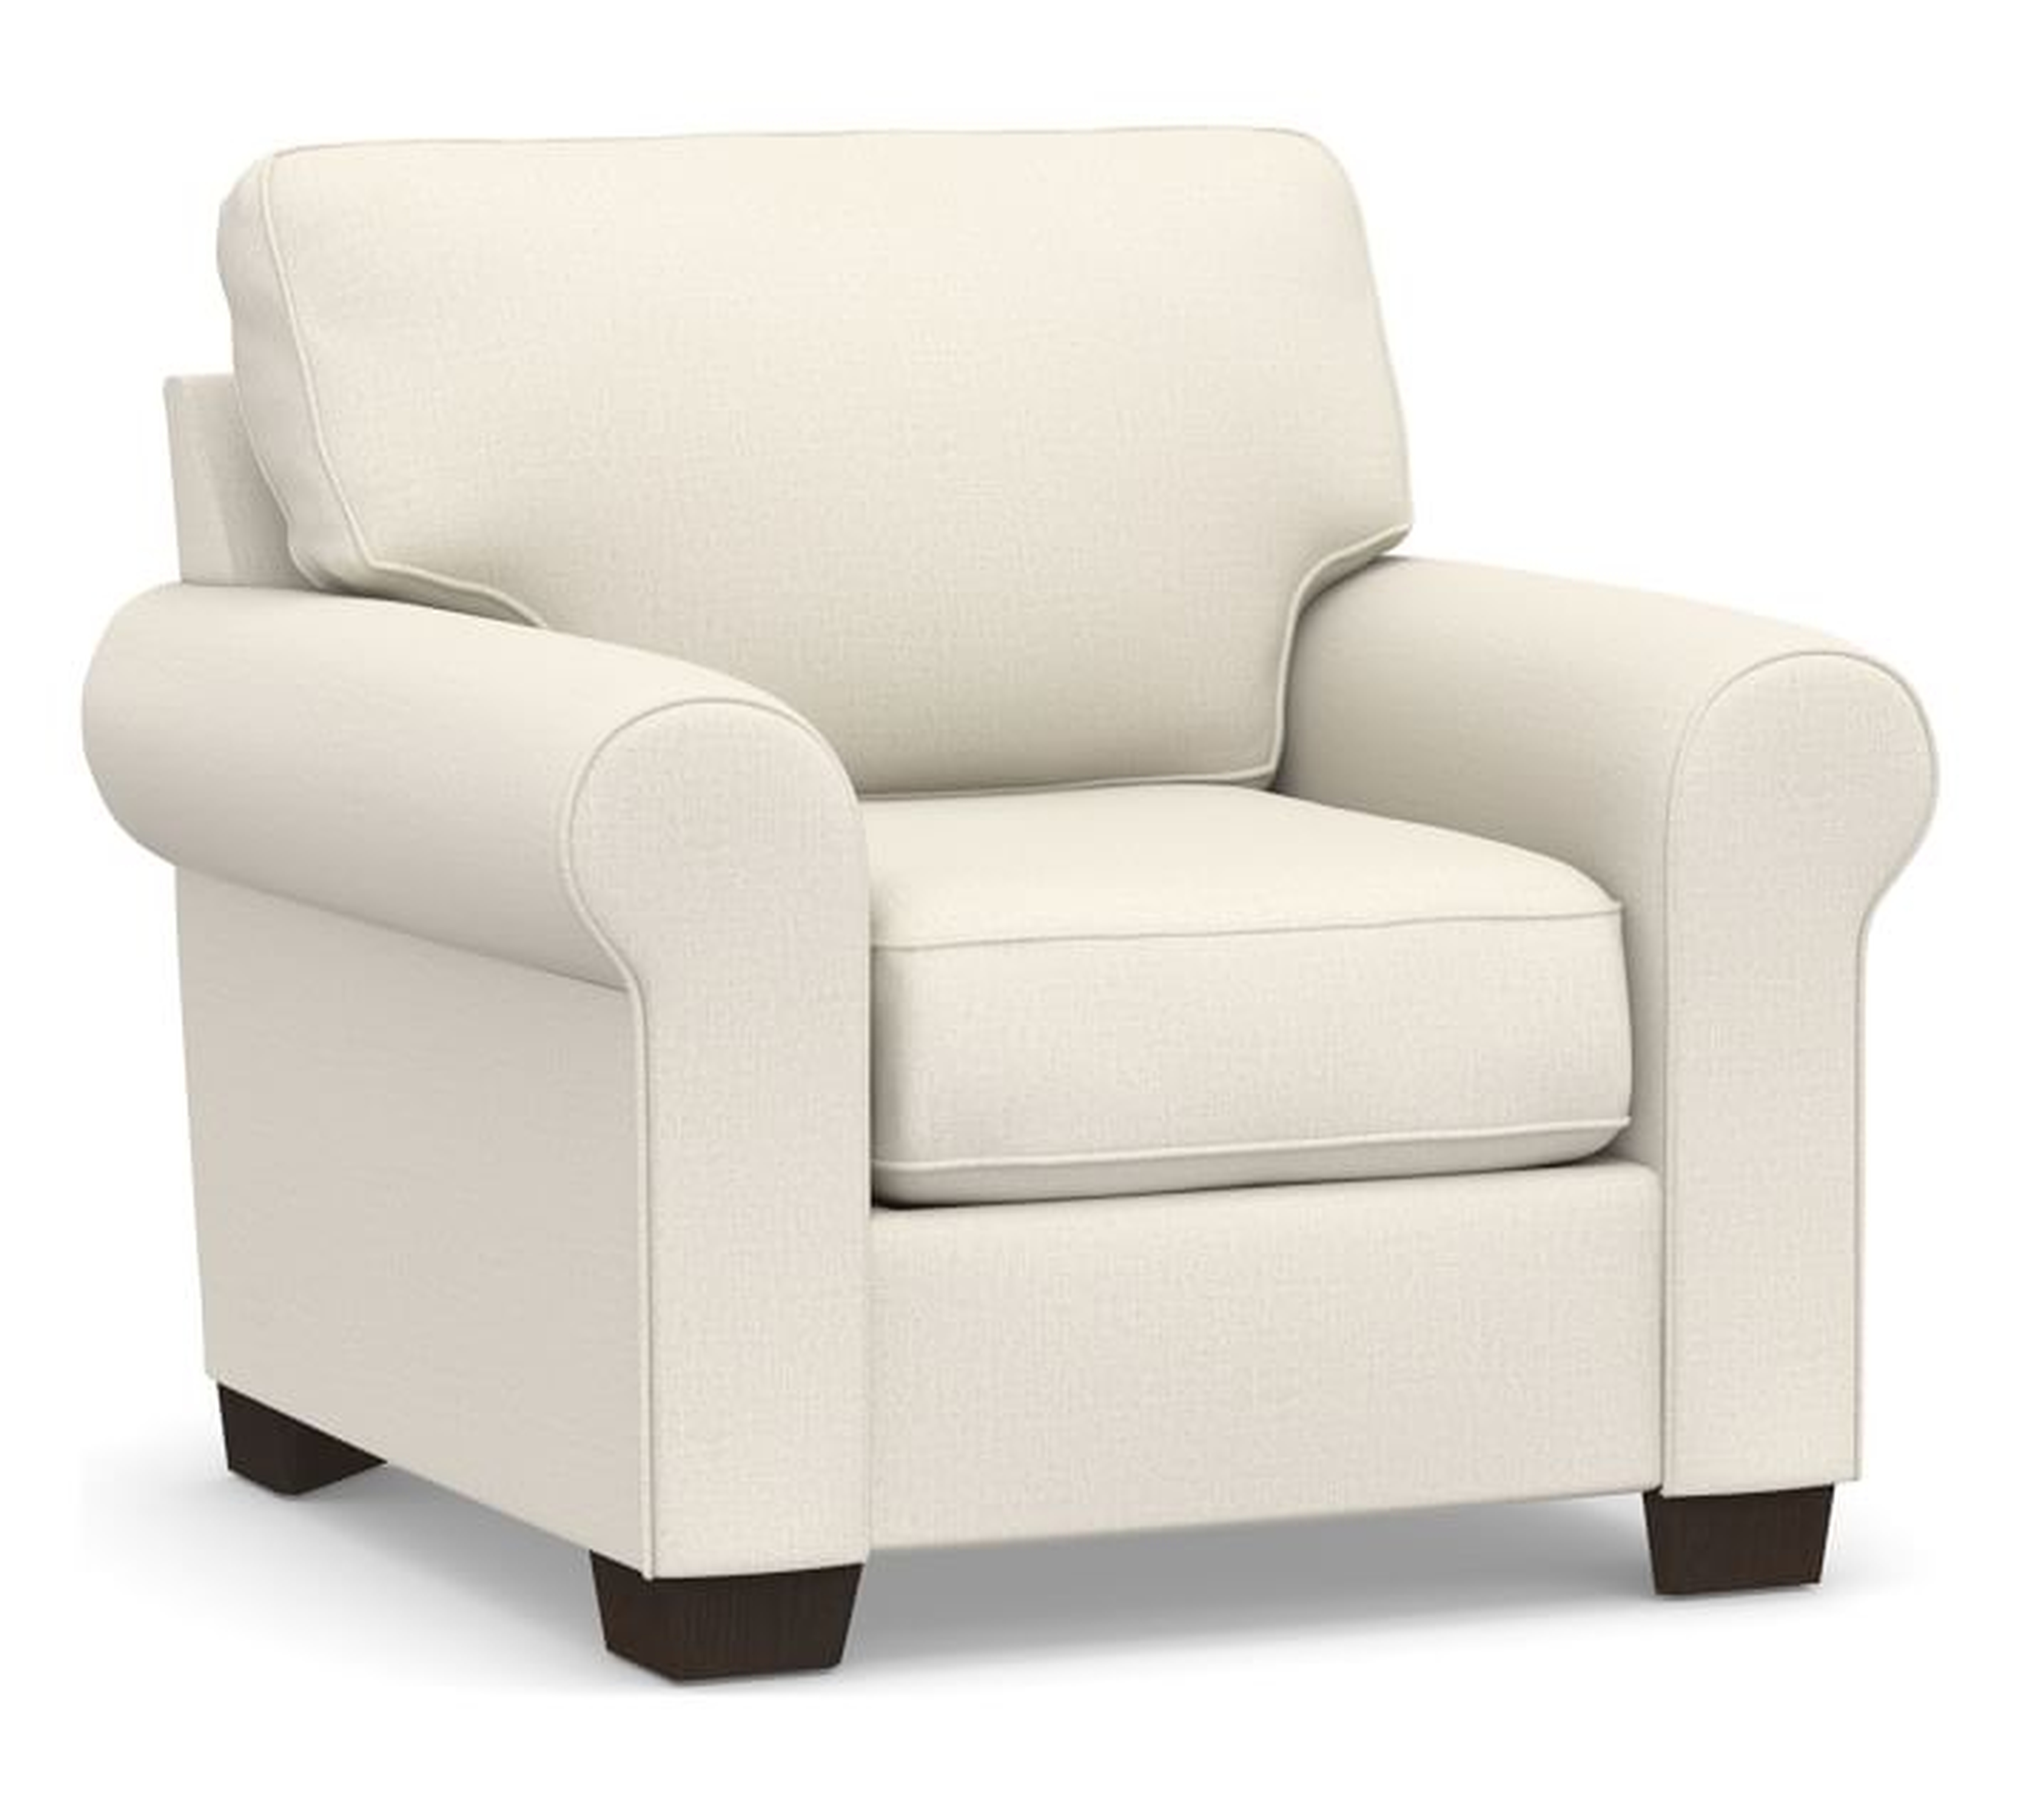 Buchanan Roll Arm Upholstered Armchair, Polyester Wrapped Cushions, Performance Heathered Tweed Ivory - Pottery Barn